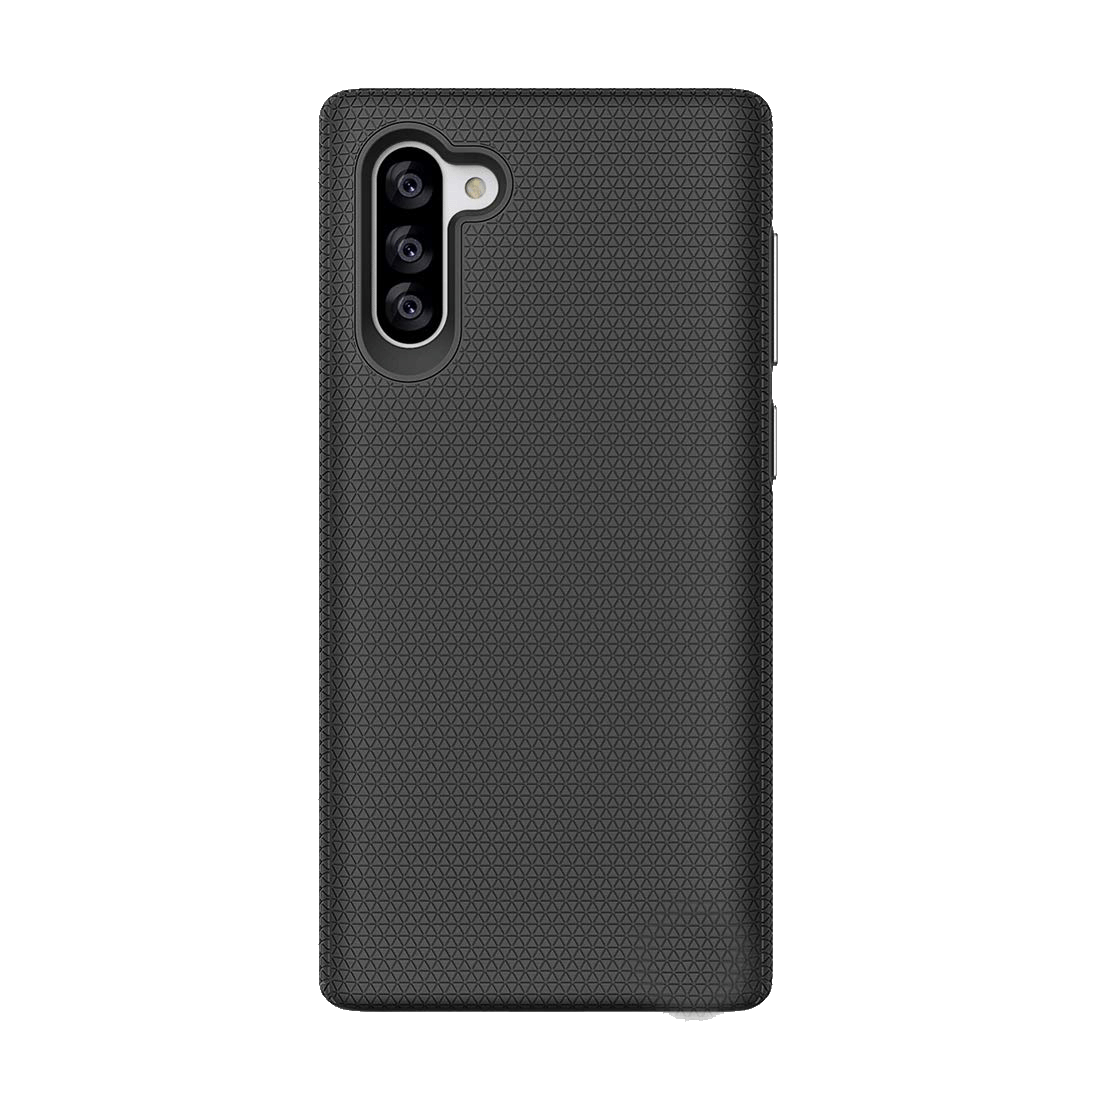 stuffcool Spike Hard Polycarbonate Back Cover for Samsung Galaxy Note 10 (Camera Protection, Black)